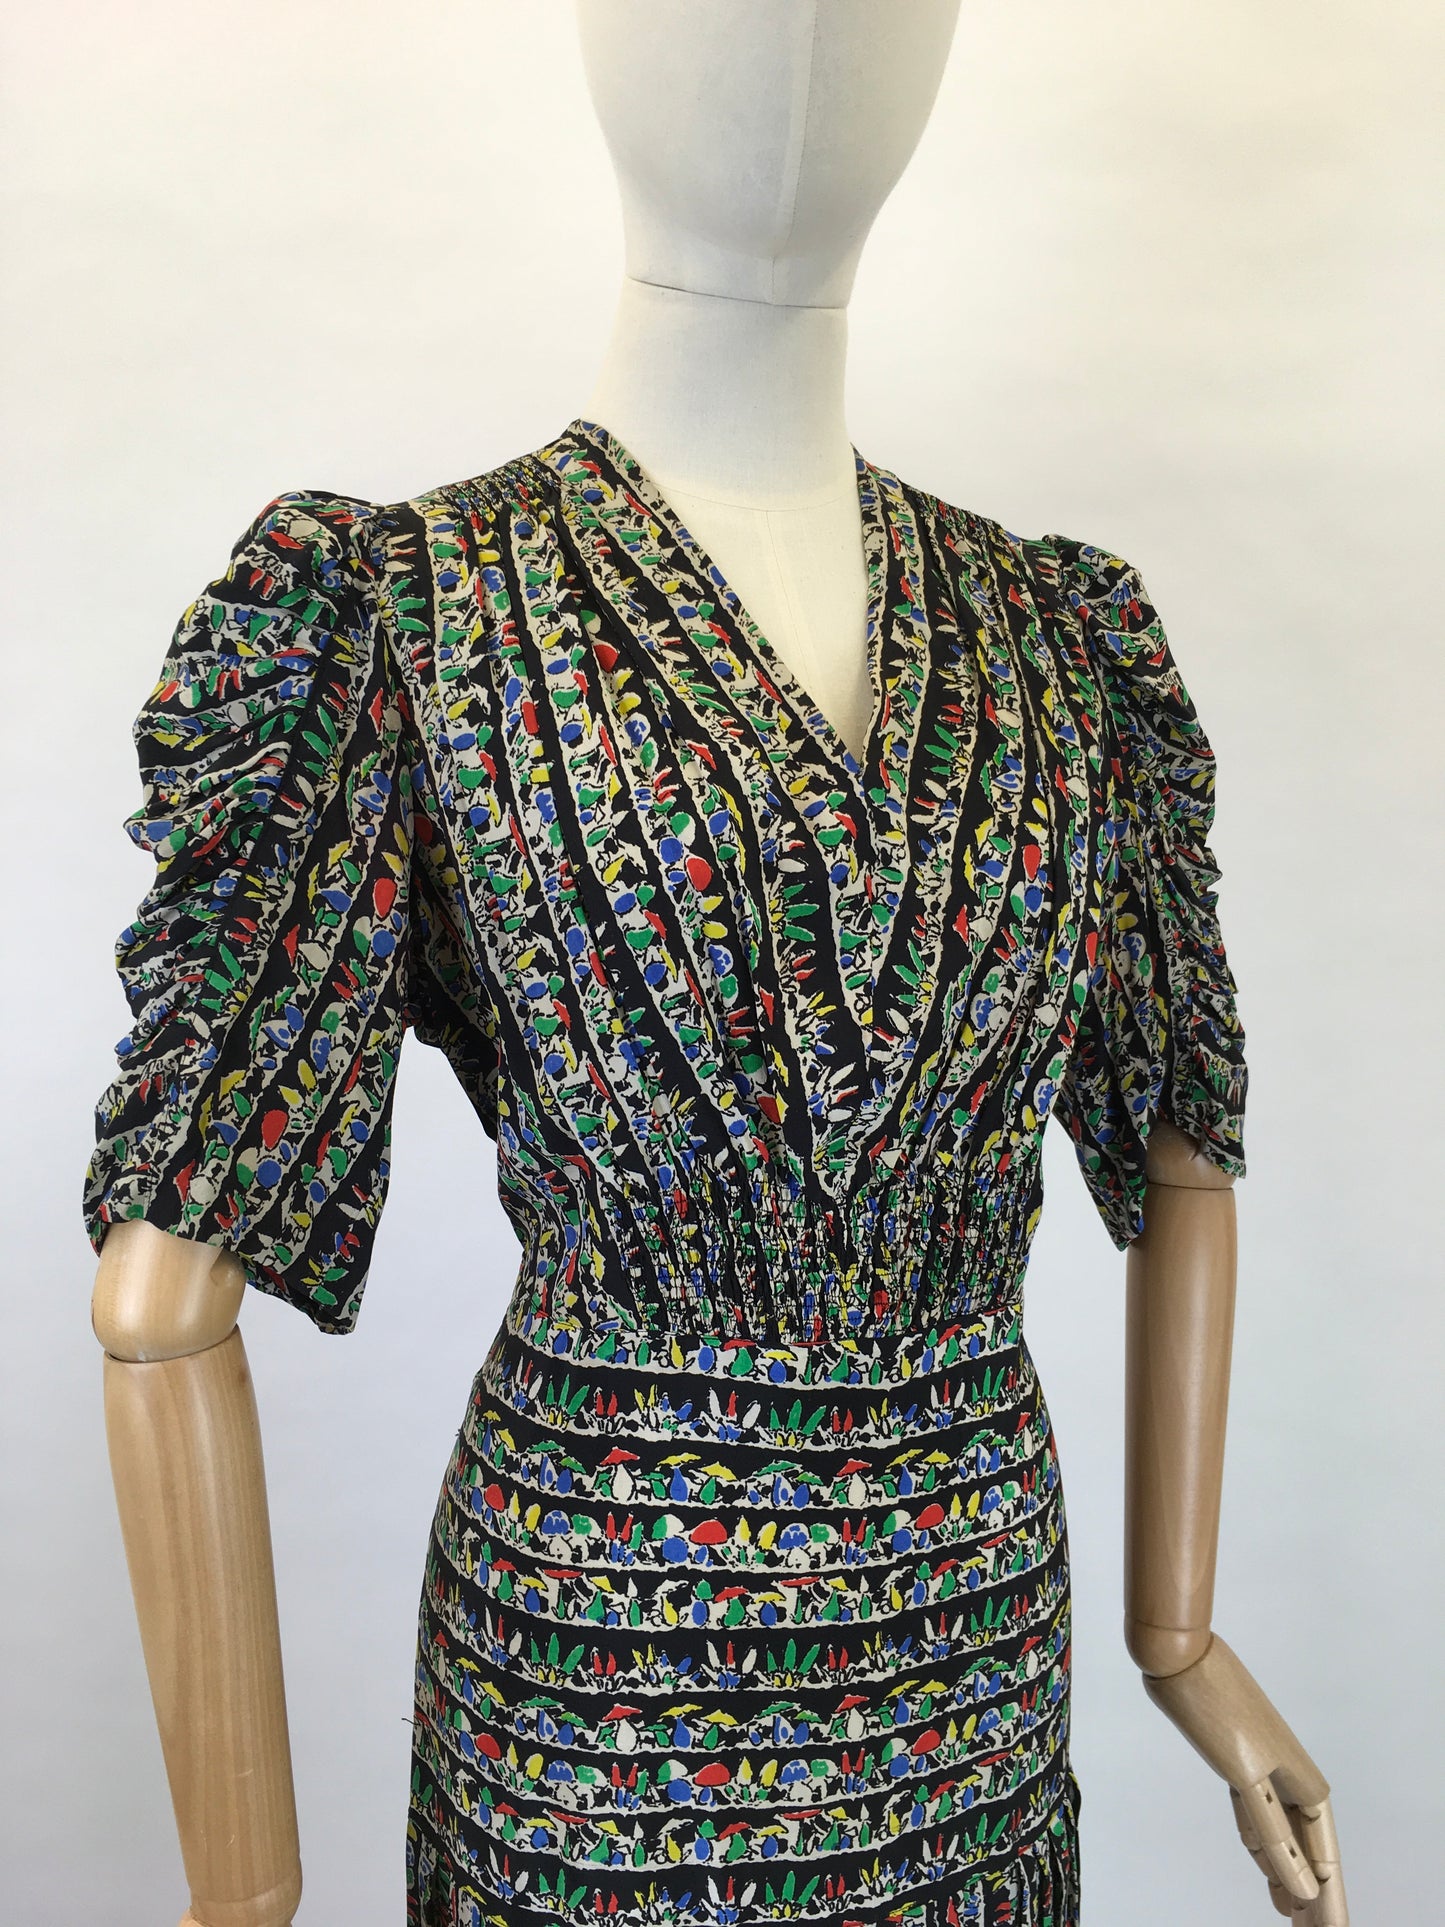 Original 1930s STUNNING Novelty Print Dress - Featuring Toadstools I’m Primary Reds, Yellows, Blues and Greens